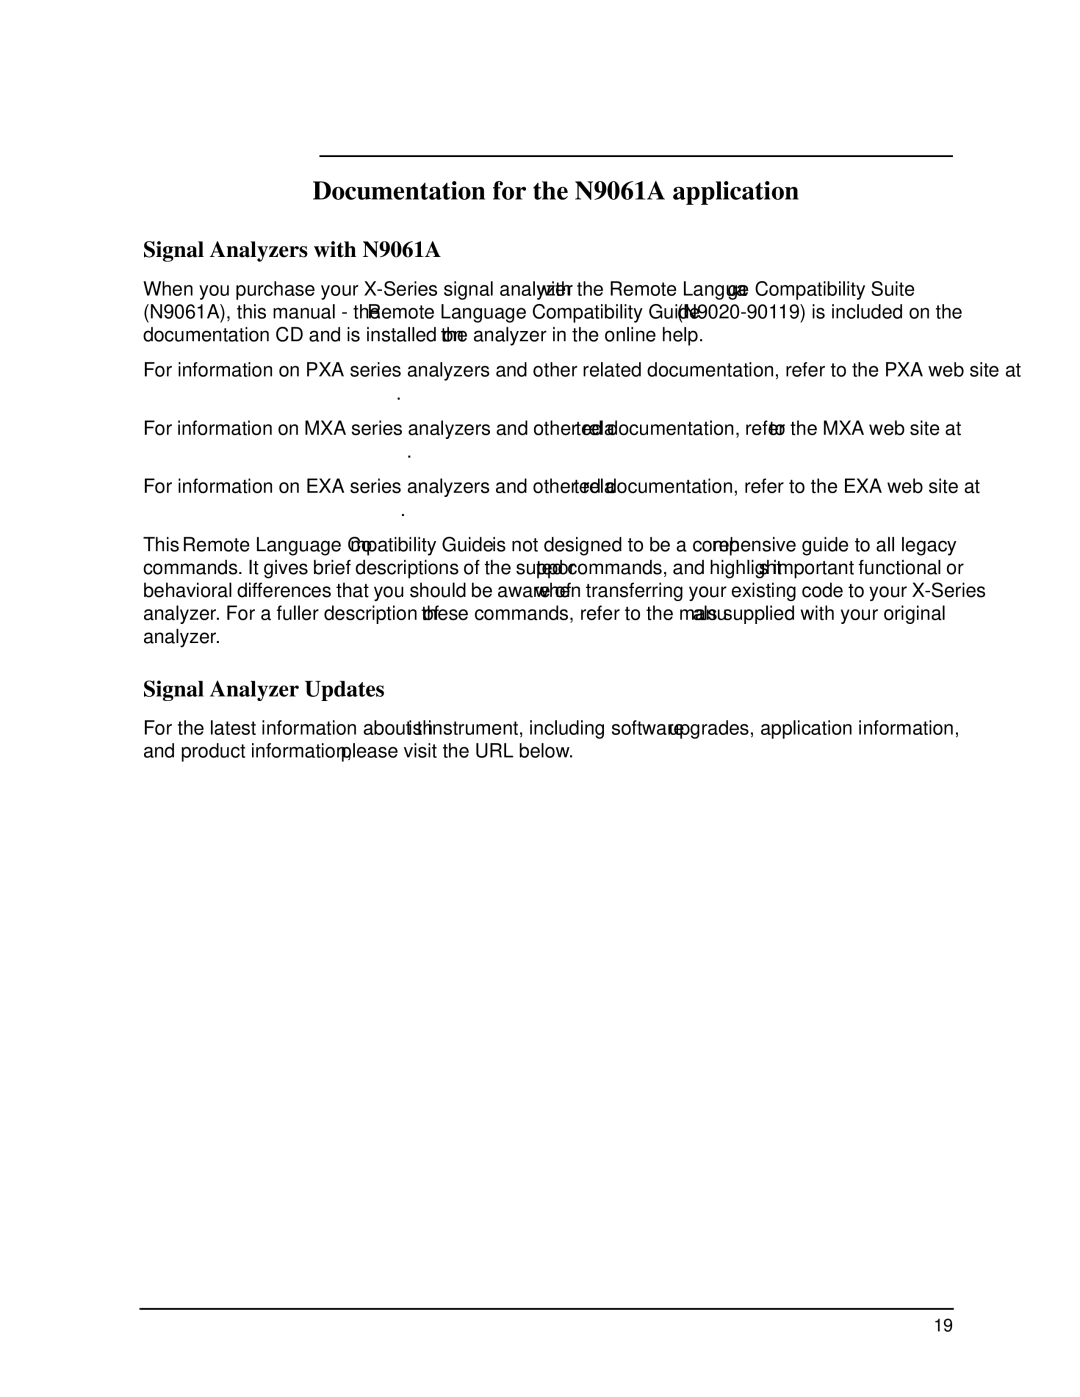 Agilent Technologies N9030a manual Documentation for the N9061A application, Signal Analyzers with N9061A 